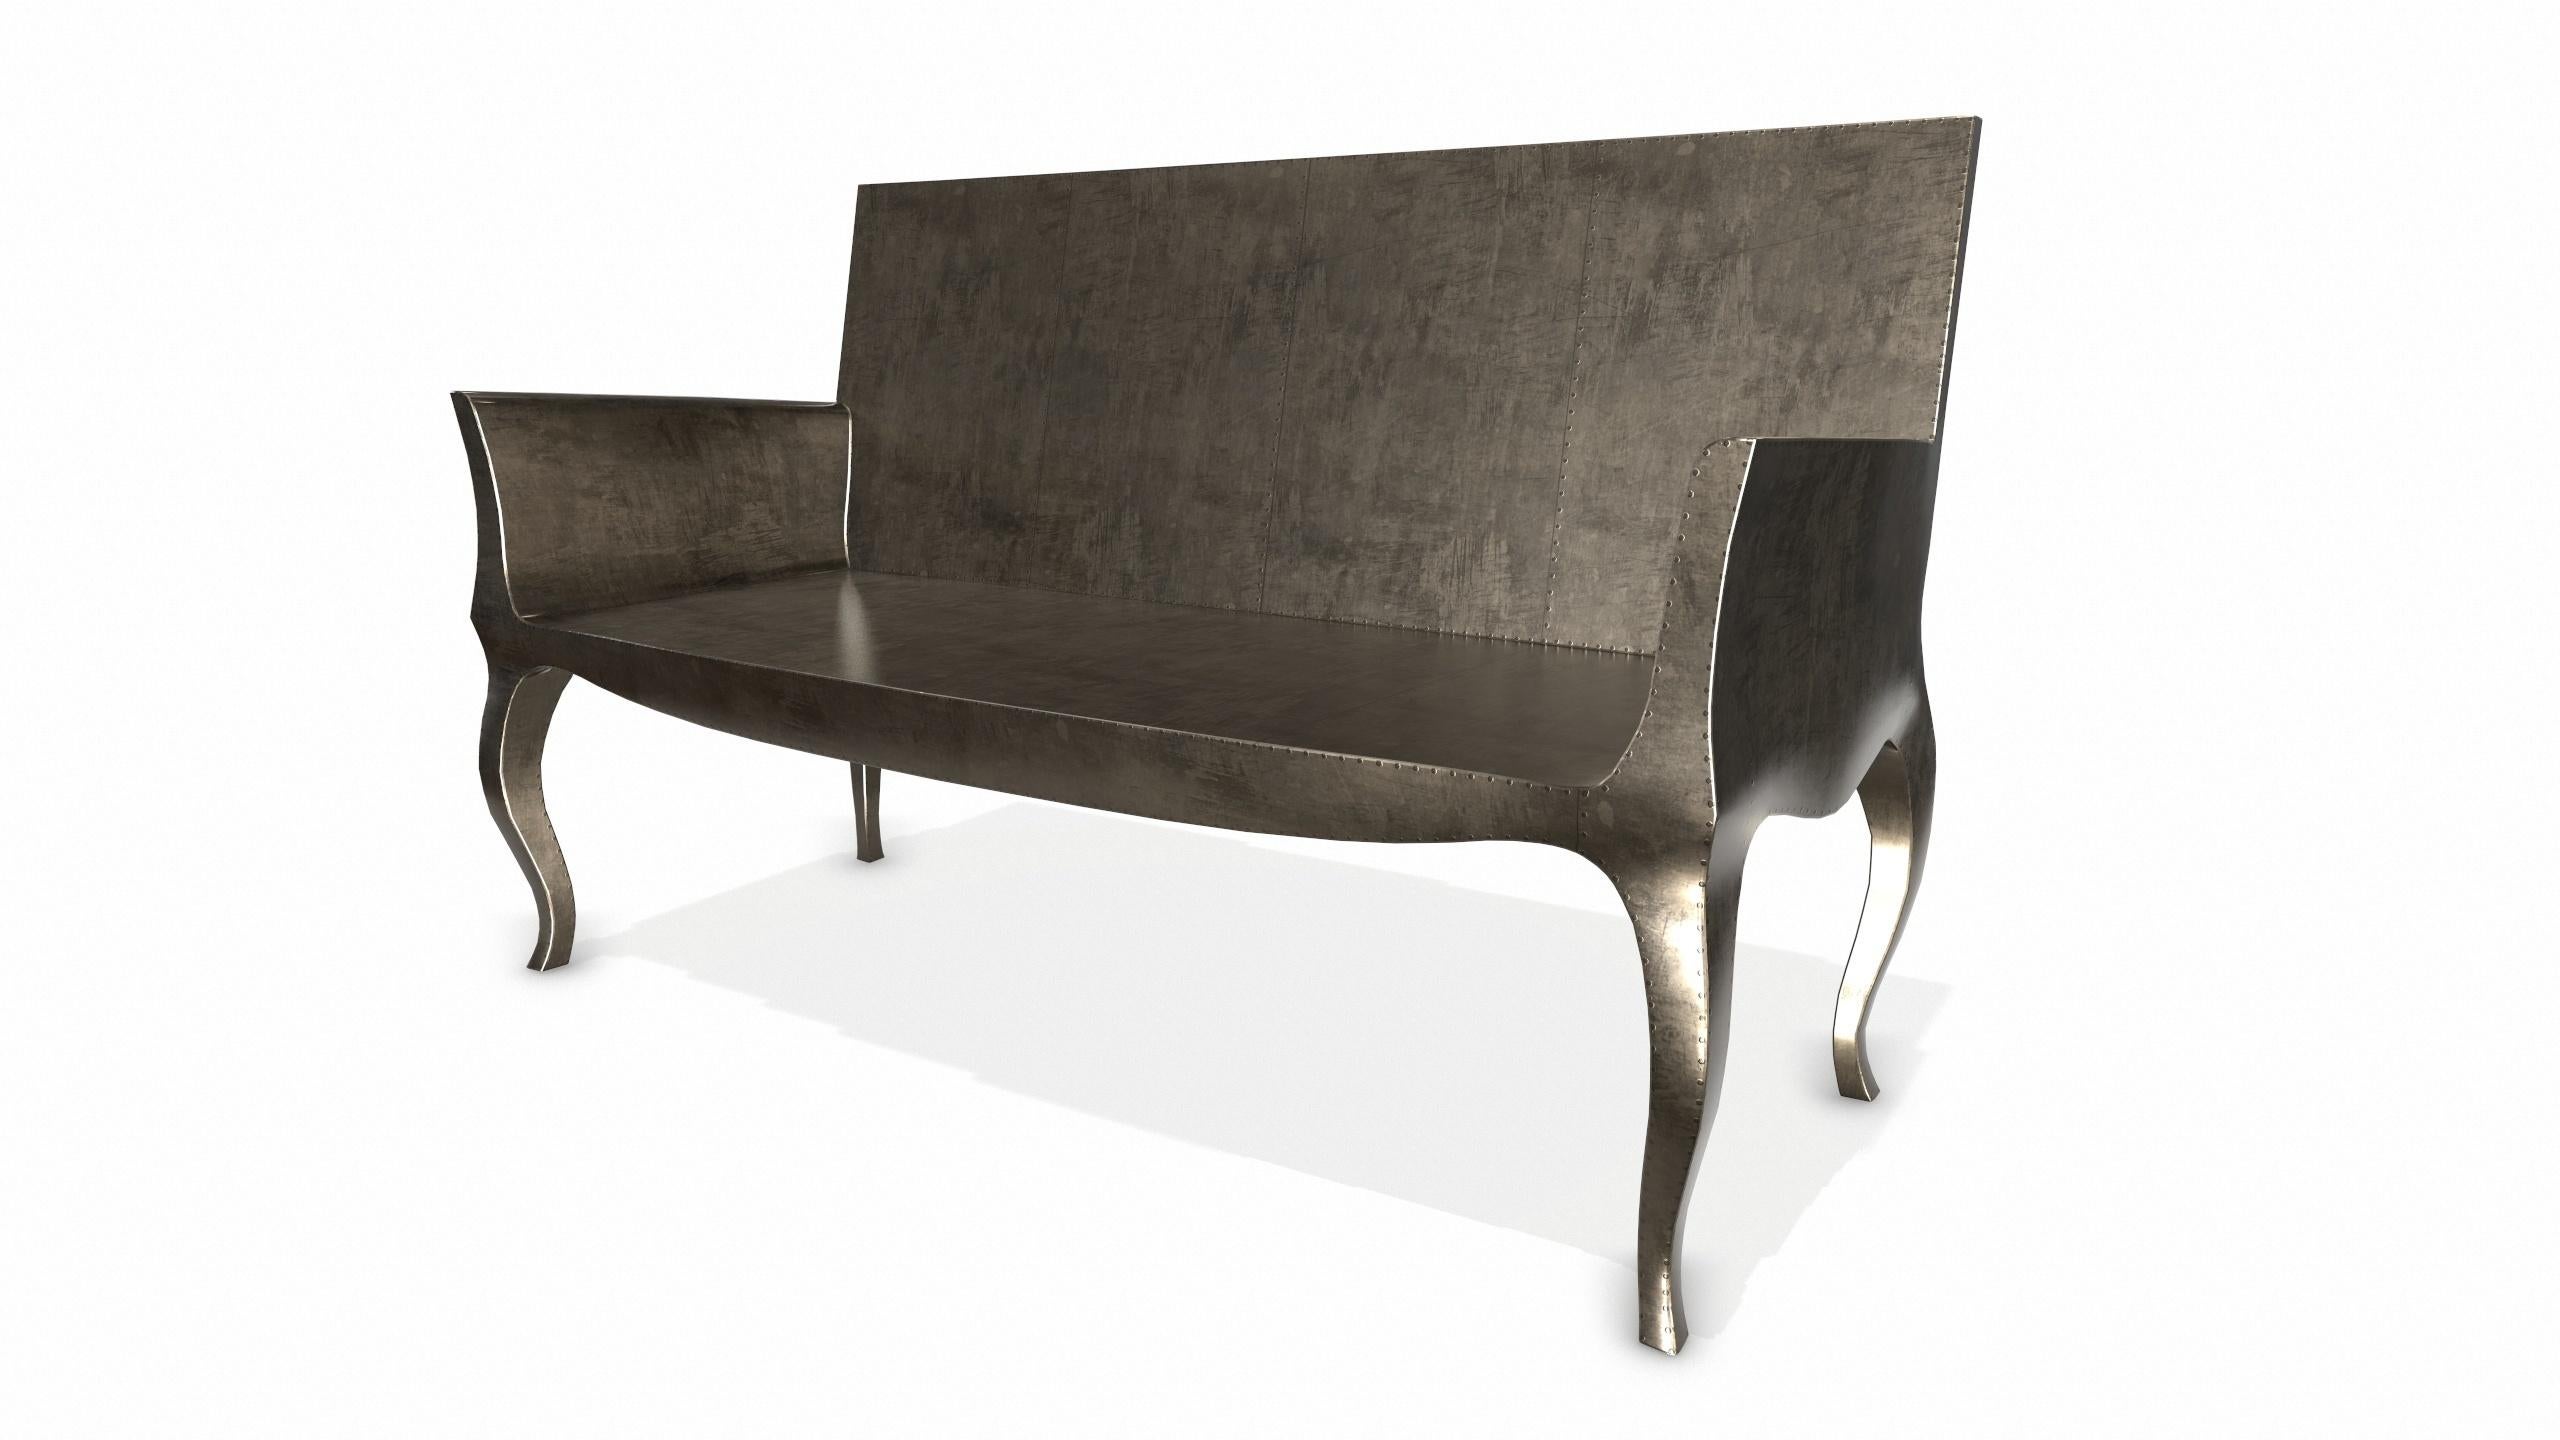 American Louise Settee Art Deco Loveseats in Smooth Antique Bronze by Paul Mathieu For Sale